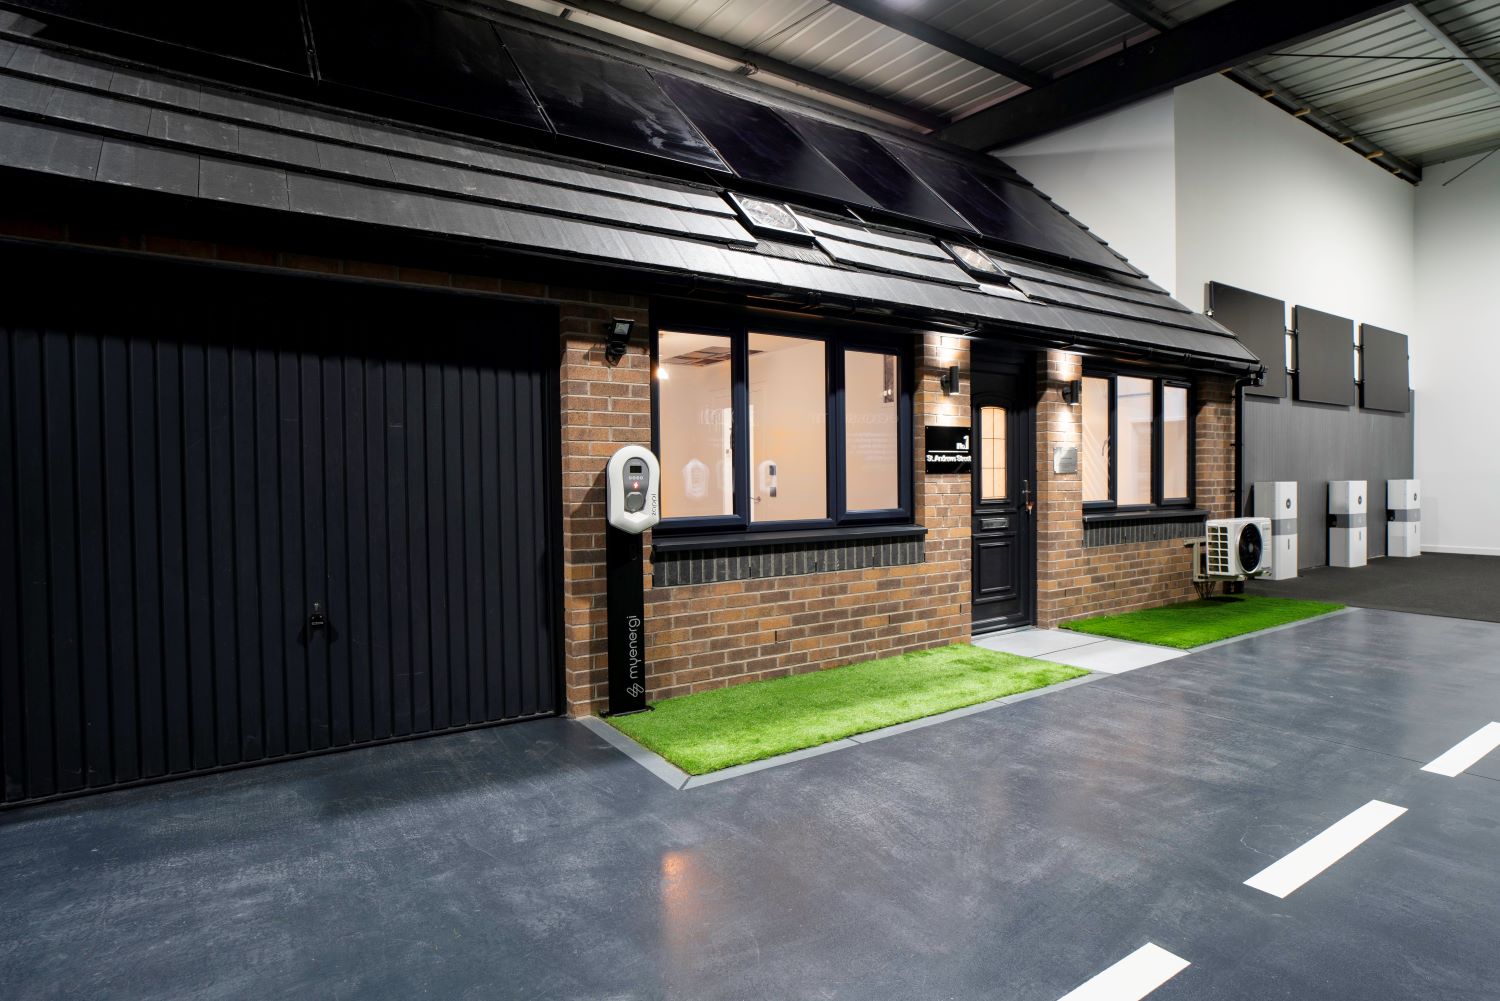 Net Zero Home facility set to play key role in future of renewables